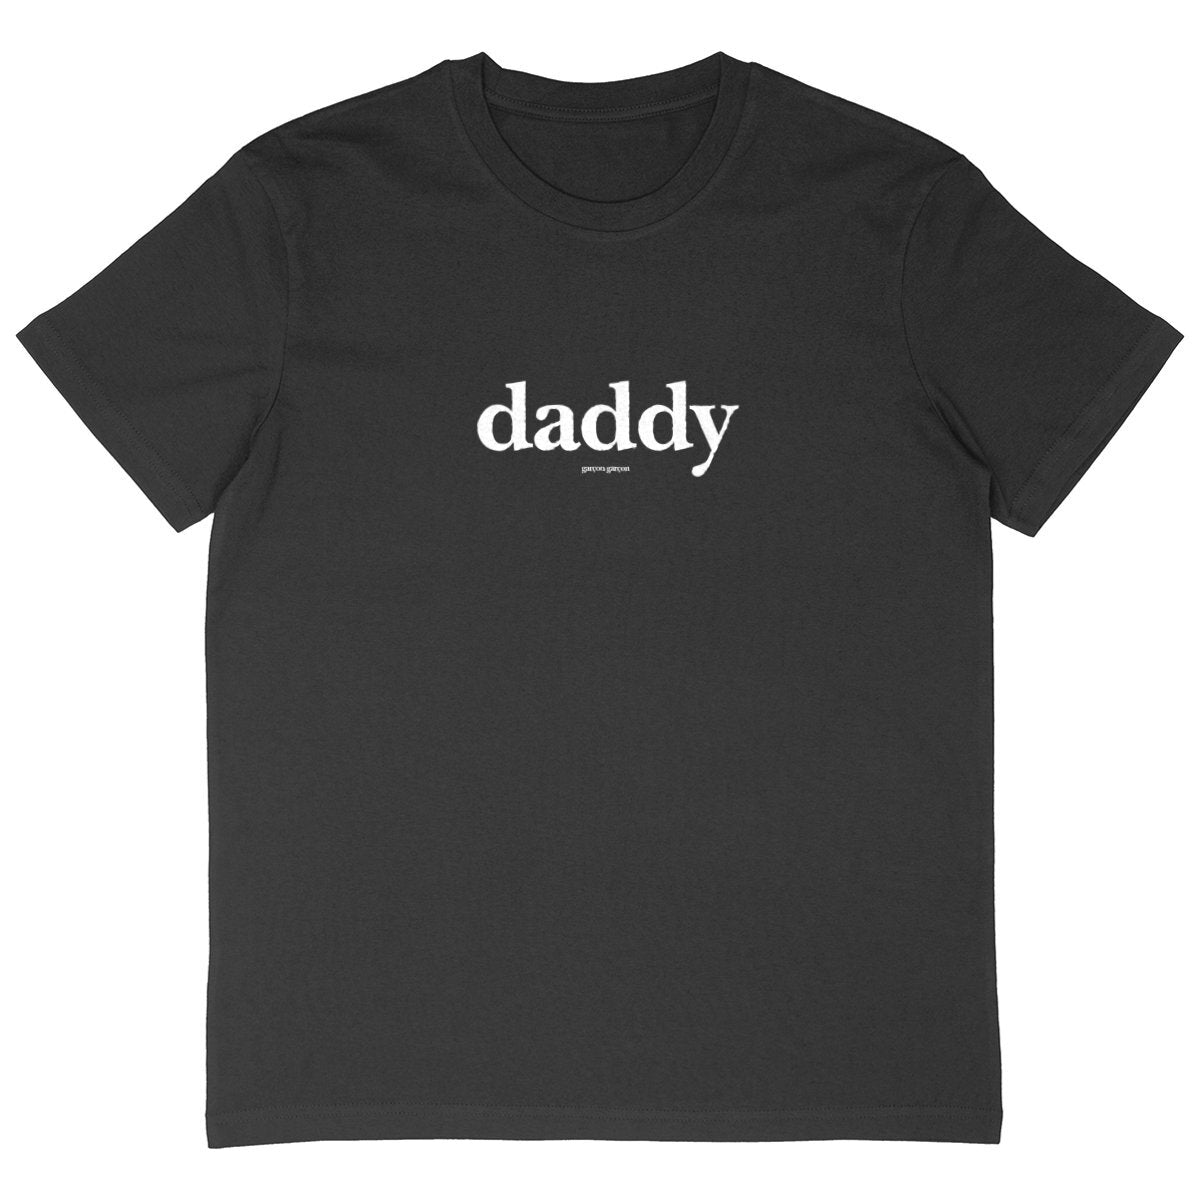 daddy  tee oversized. garçon garçon tee oversize BLACK. Dive into the essence of Parisian cool with this oversized tee. The subtle 'garçon garçon' signature whispers a chic narrative, offering a slice of the city's famed elegance. Perfect for those who speak style with simplicity.